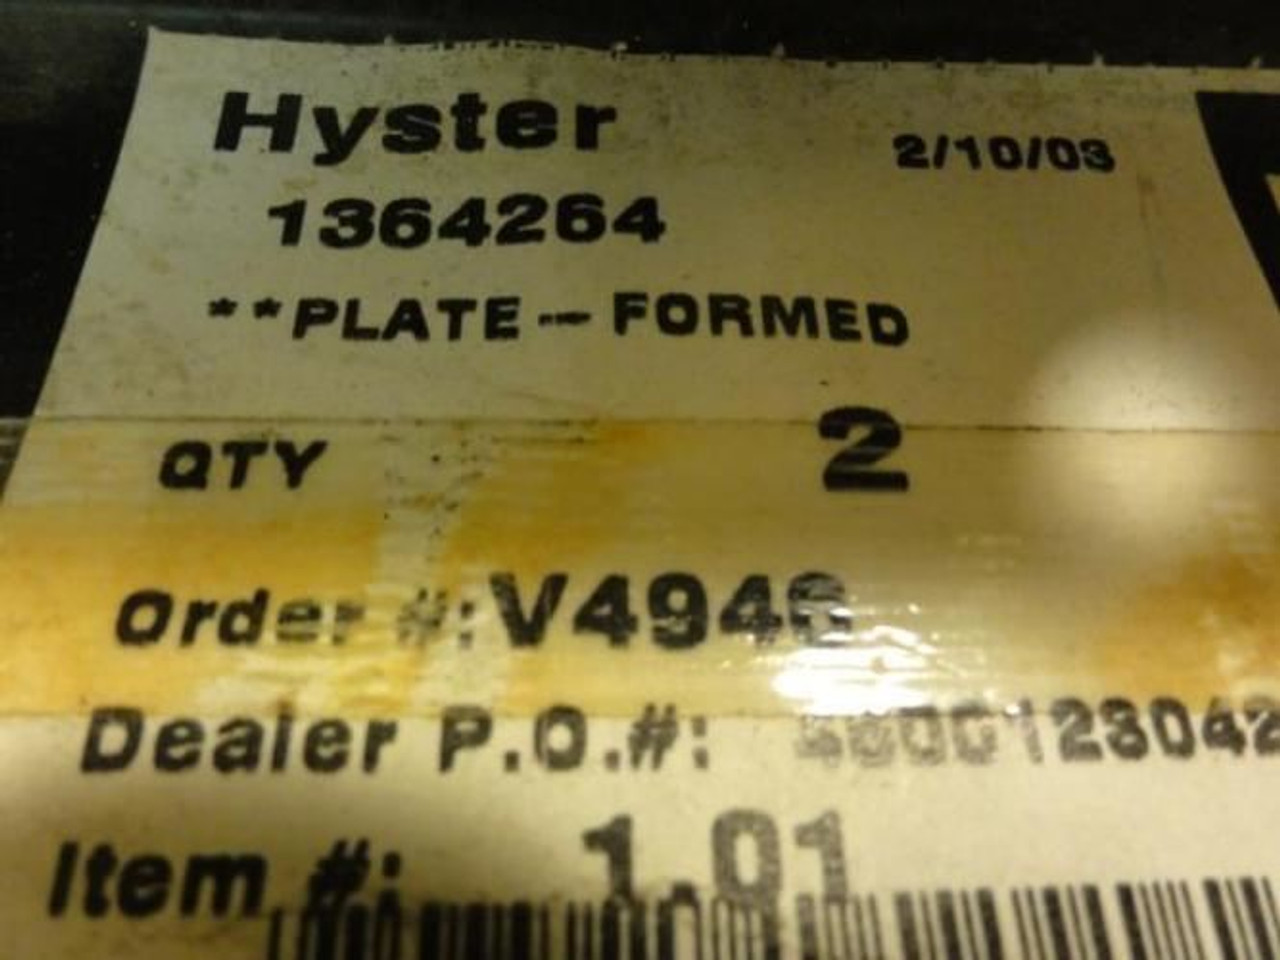 Hyster 1364264; Formed Plate